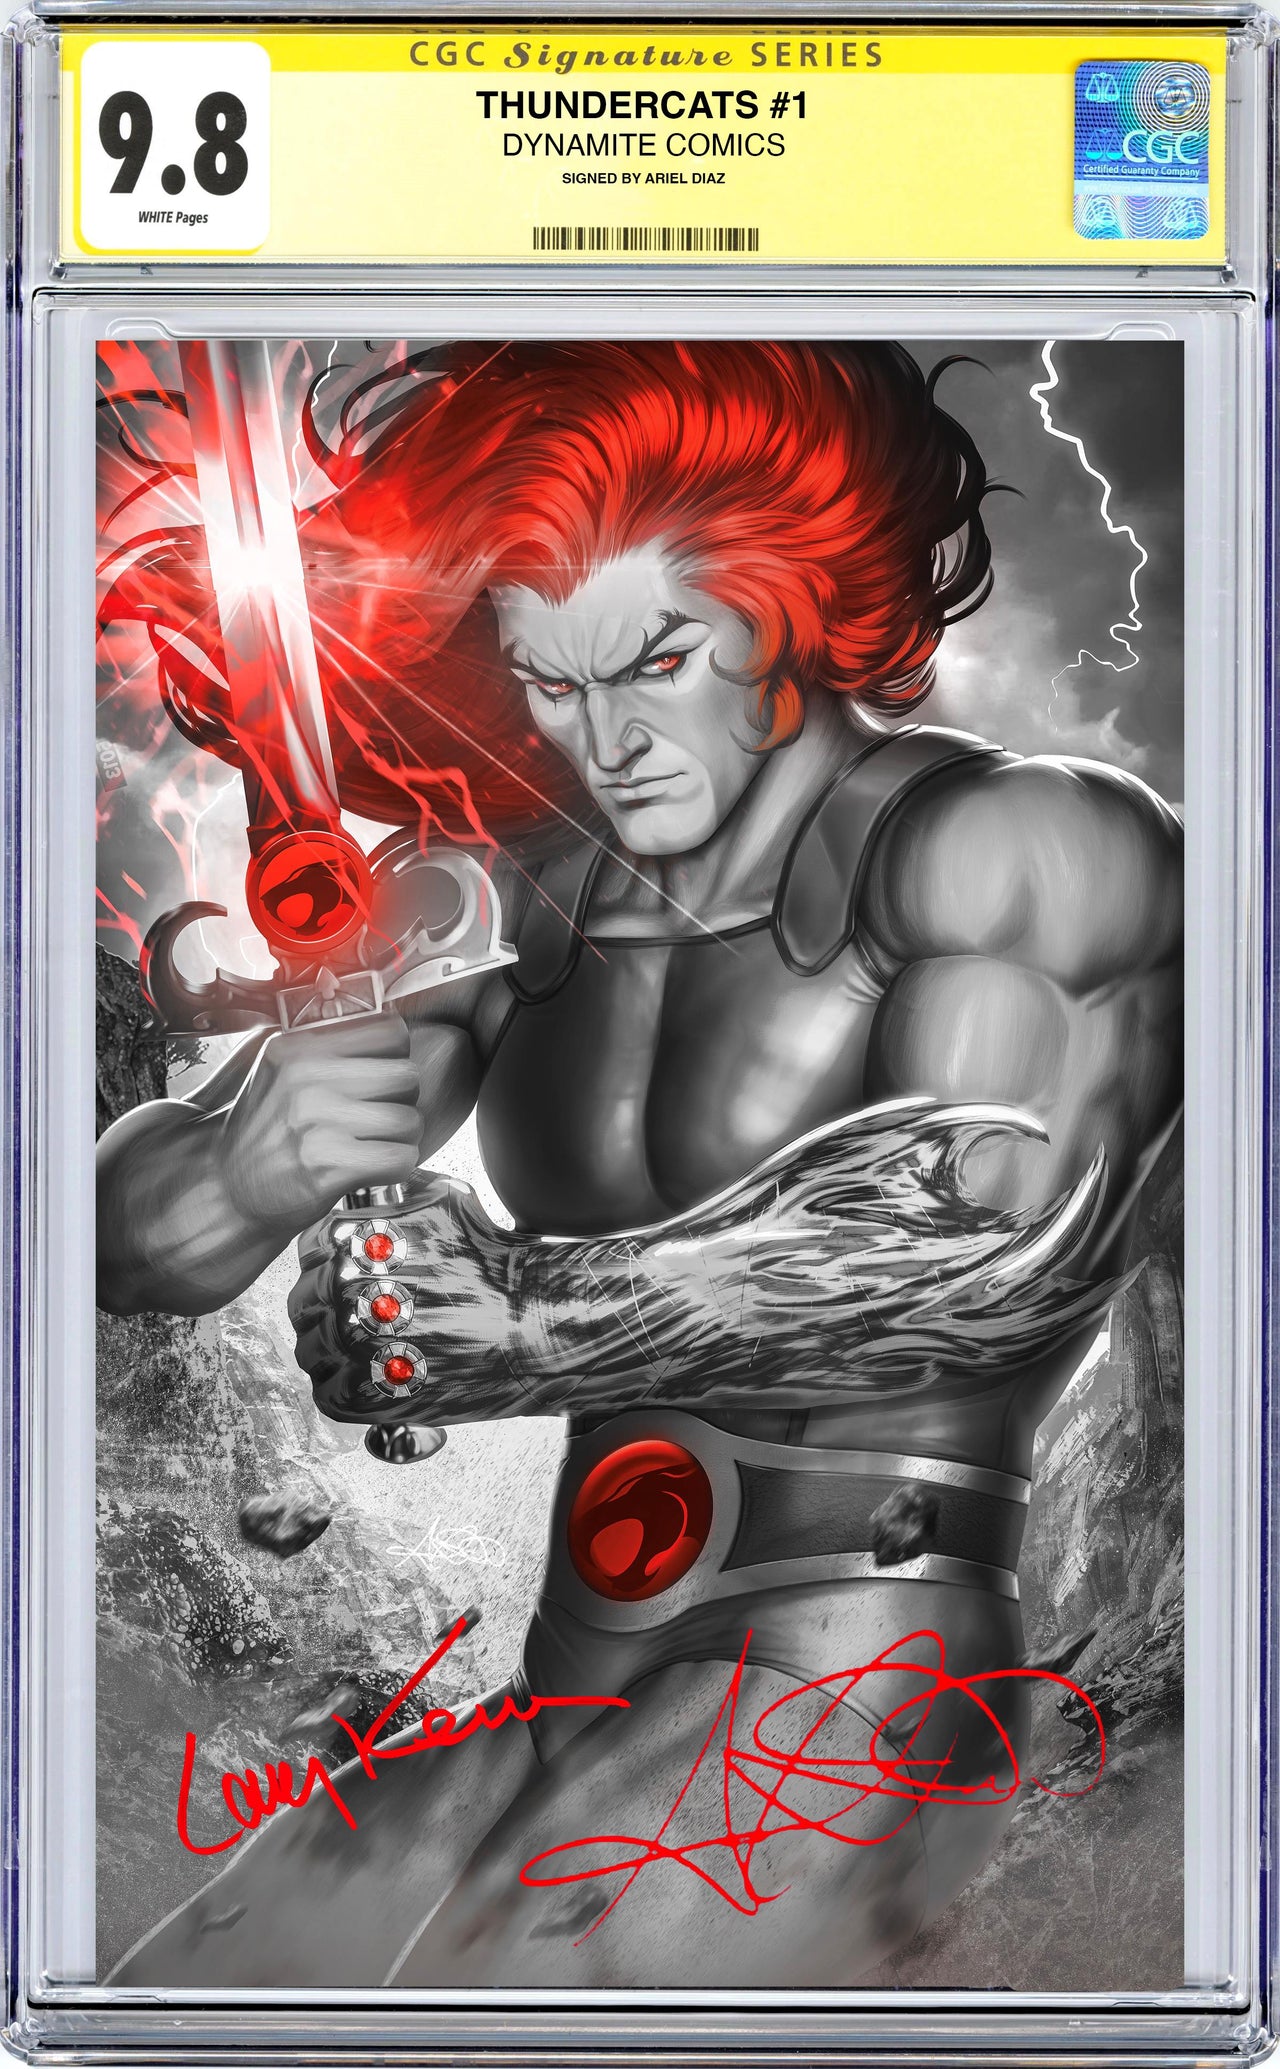 Thundercats #1 CGC SS 9.8 Megacon Exclusive Color Splash Virgin Cover Double Signed by Ariel Diaz & Larry Kenney